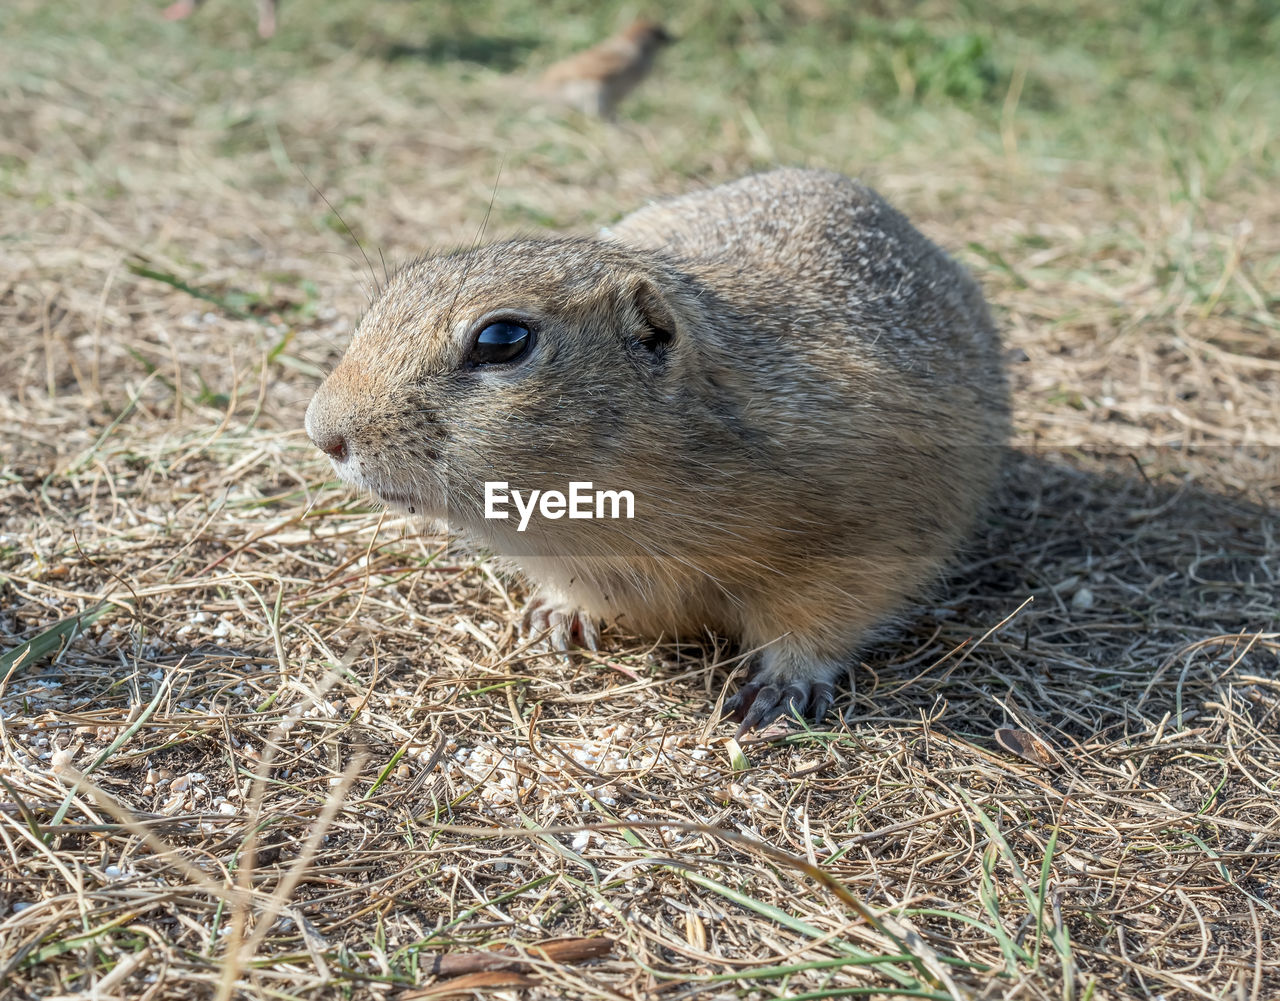 animal, animal themes, animal wildlife, one animal, wildlife, rodent, whiskers, mammal, no people, prairie dog, squirrel, nature, close-up, day, land, grass, outdoors, plant, field